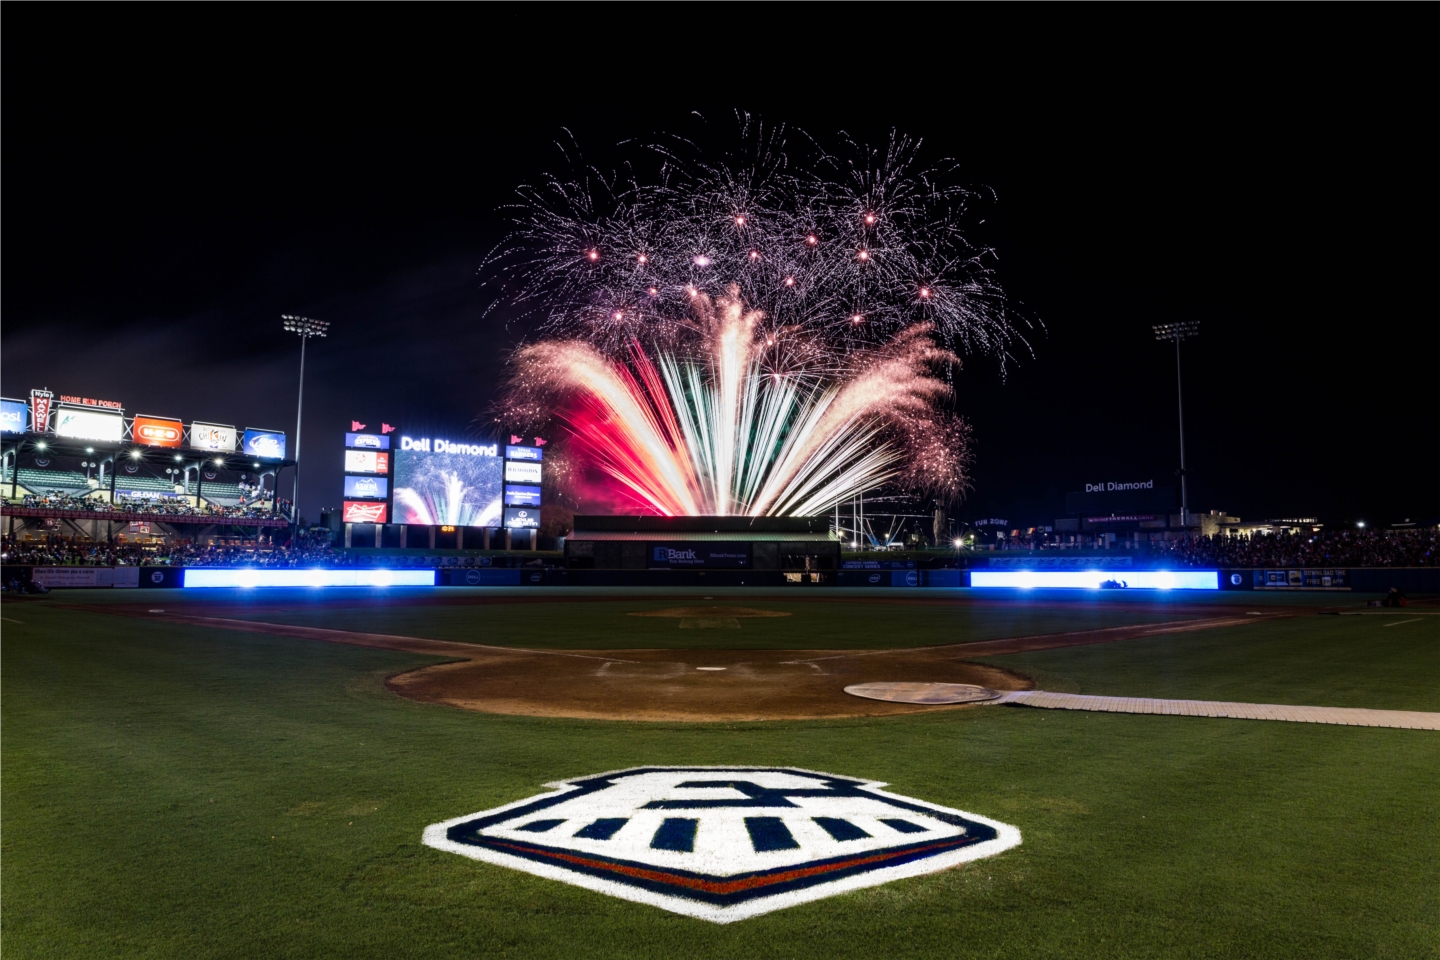 Fireworks at Dell Diamond courtesy Grease Man Photography